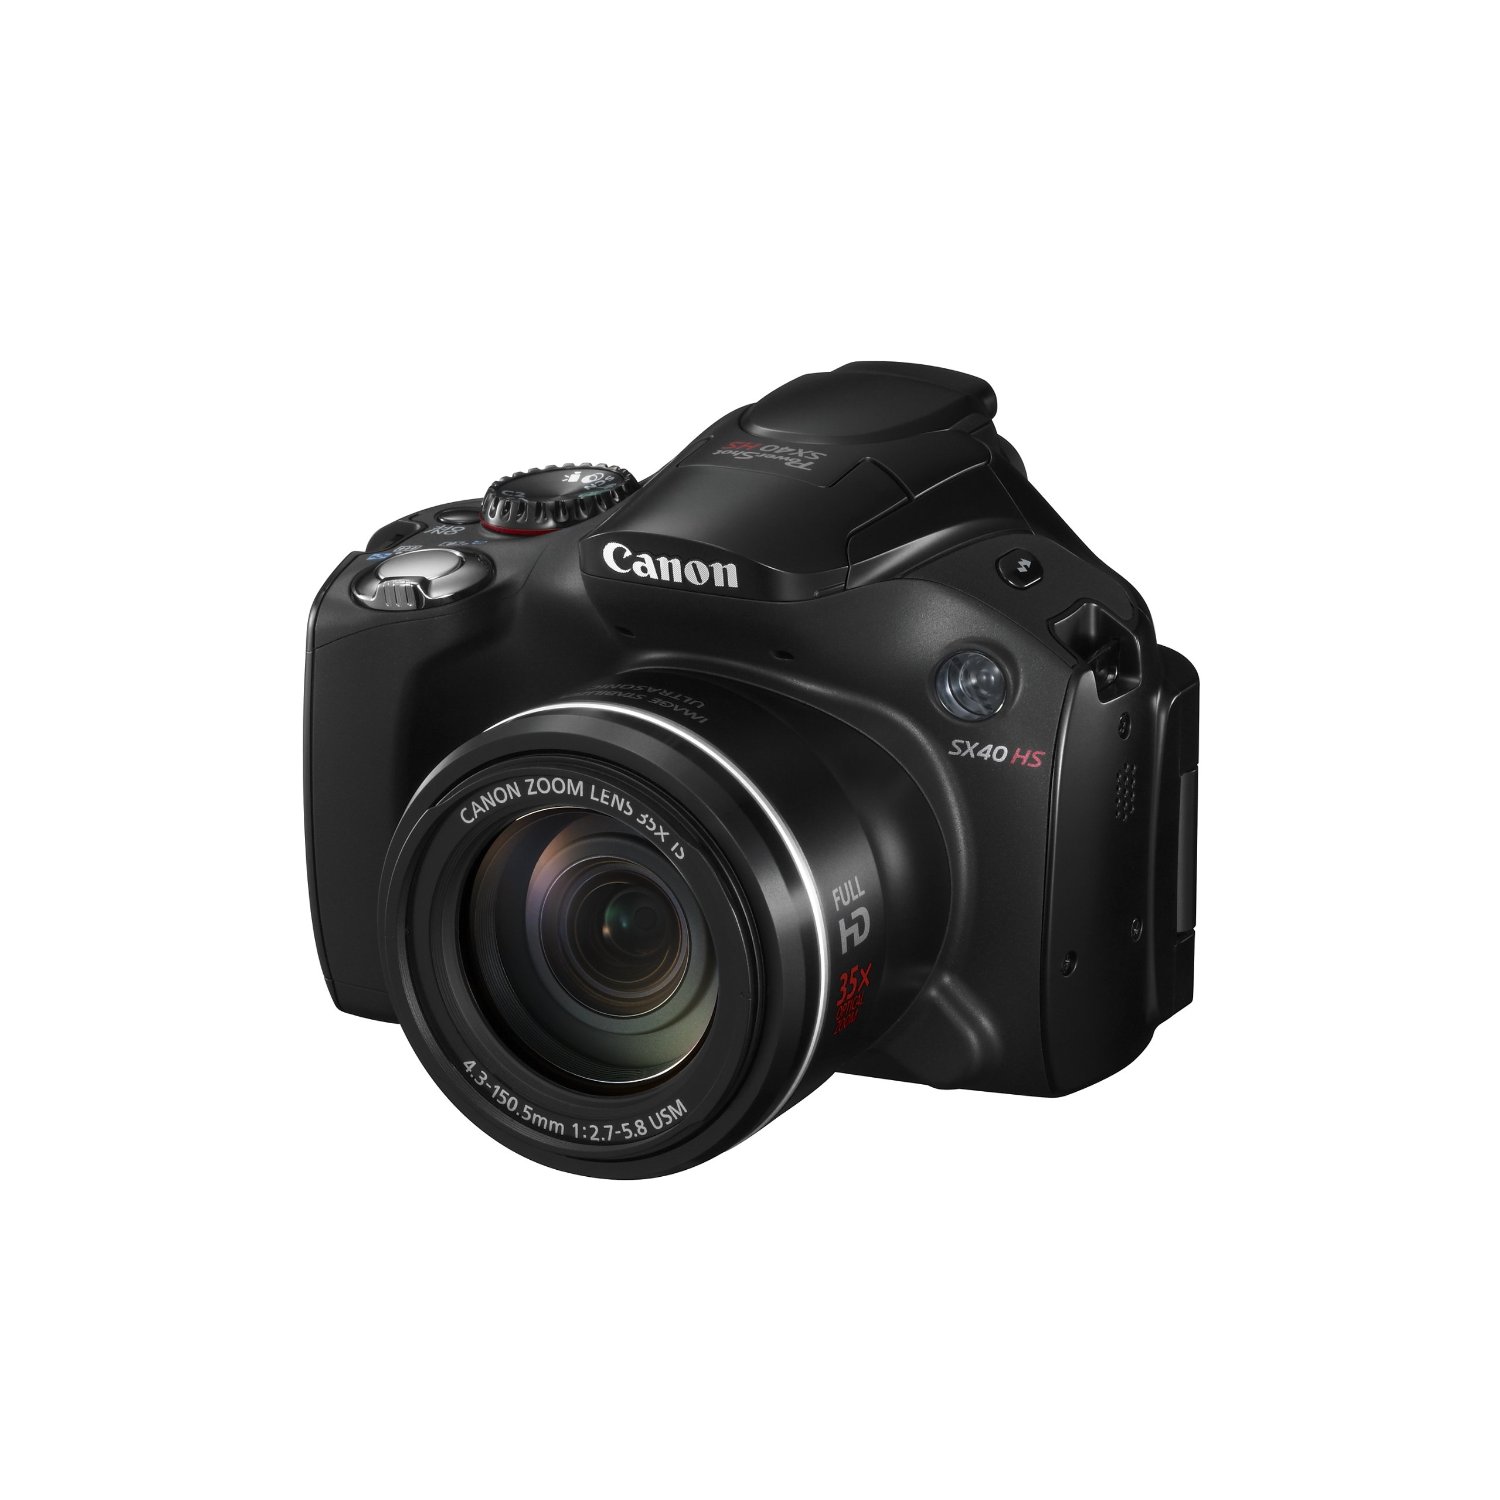 http://thetechjournal.com/wp-content/uploads/images/1110/1319693952-canons-new-sx40-hs-121mp-digital-camera-6.jpg